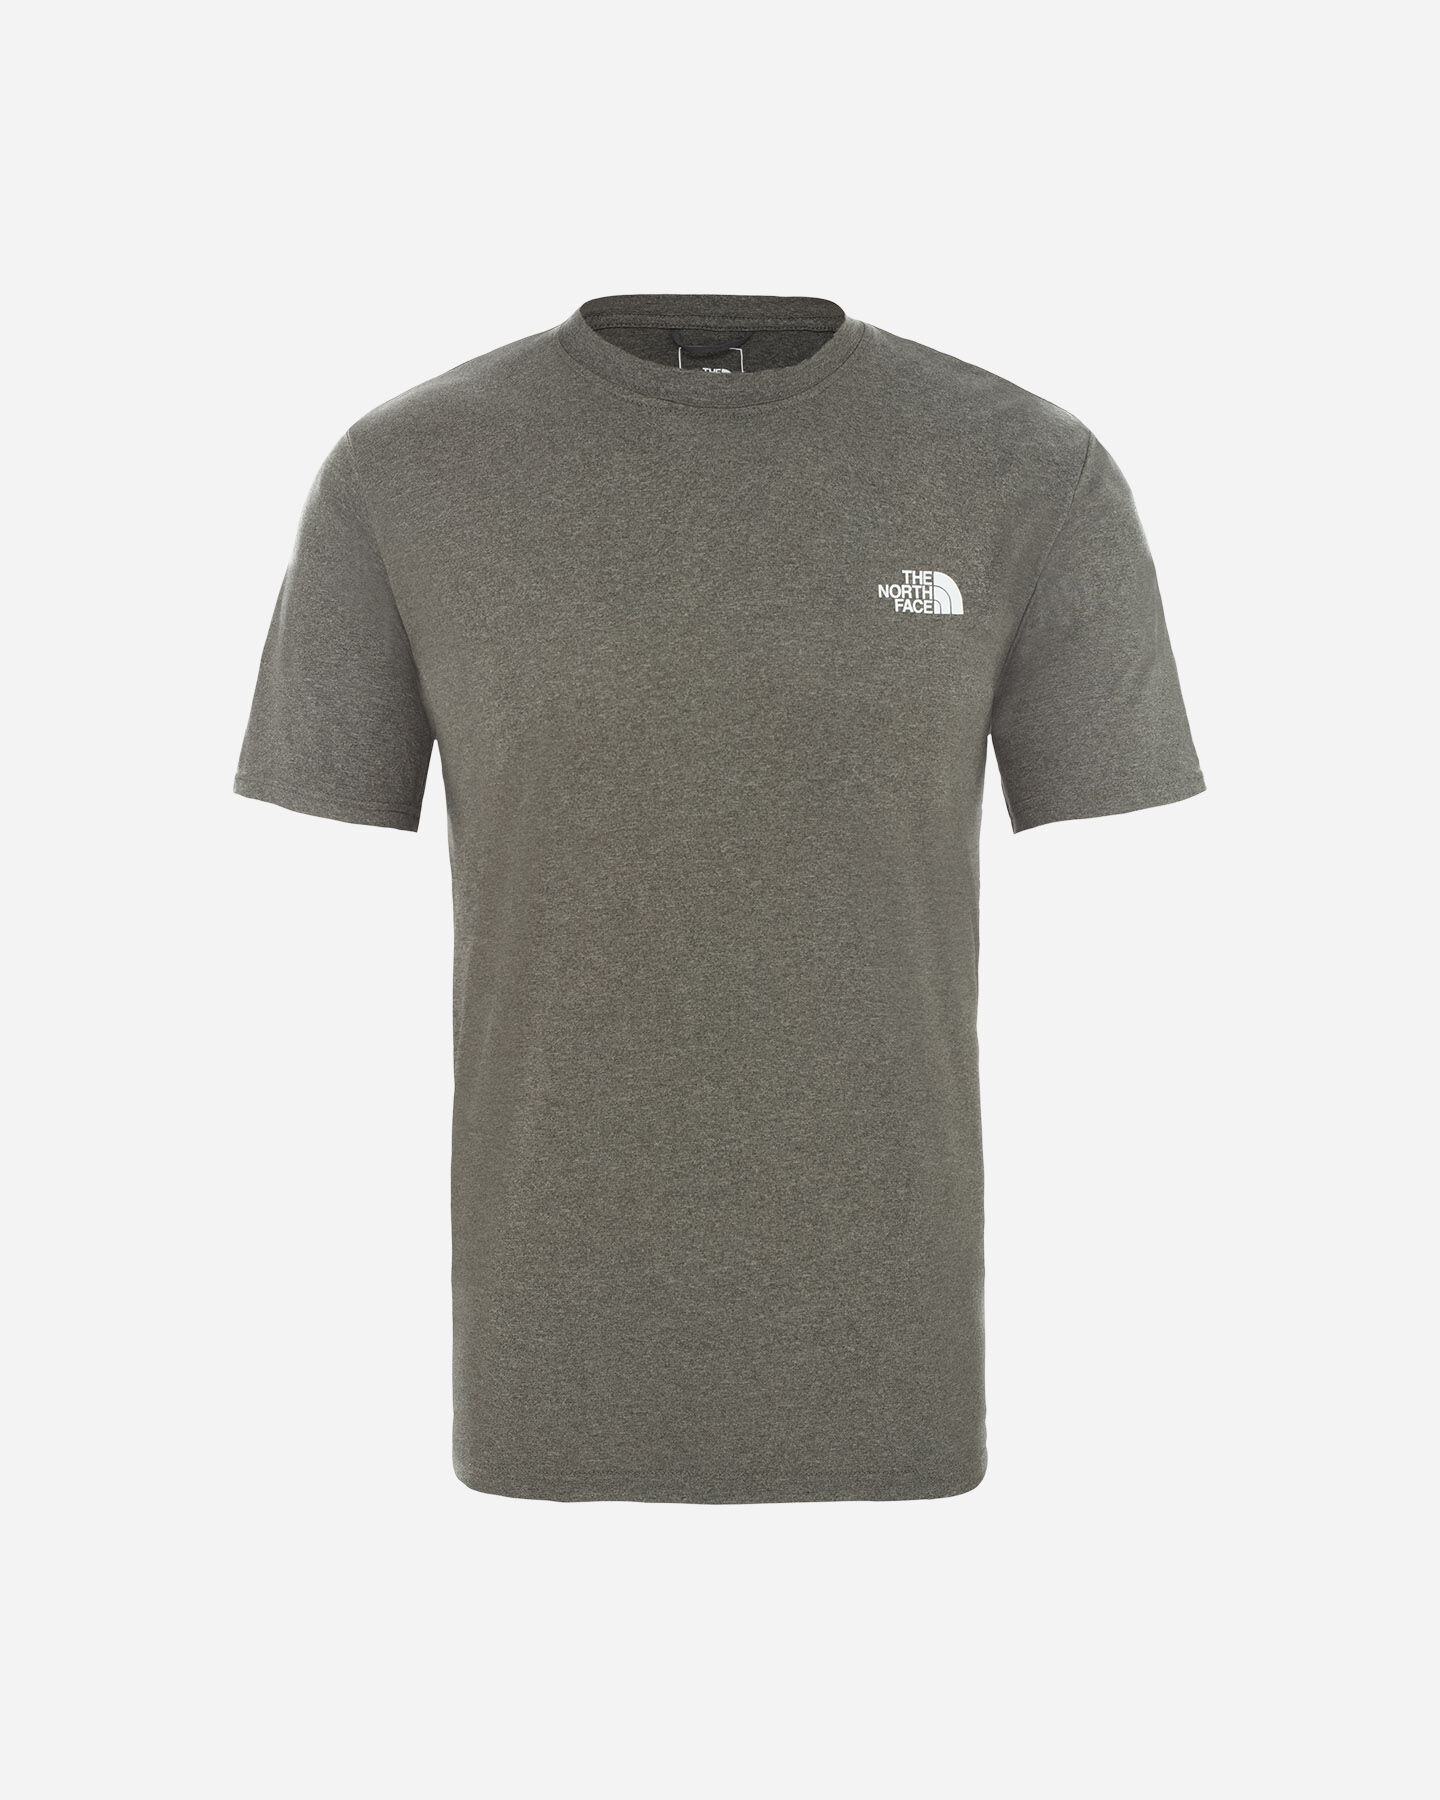  T-Shirt THE NORTH FACE REAXION AMPERE CREW M S5182549|7D0|XS scatto 0